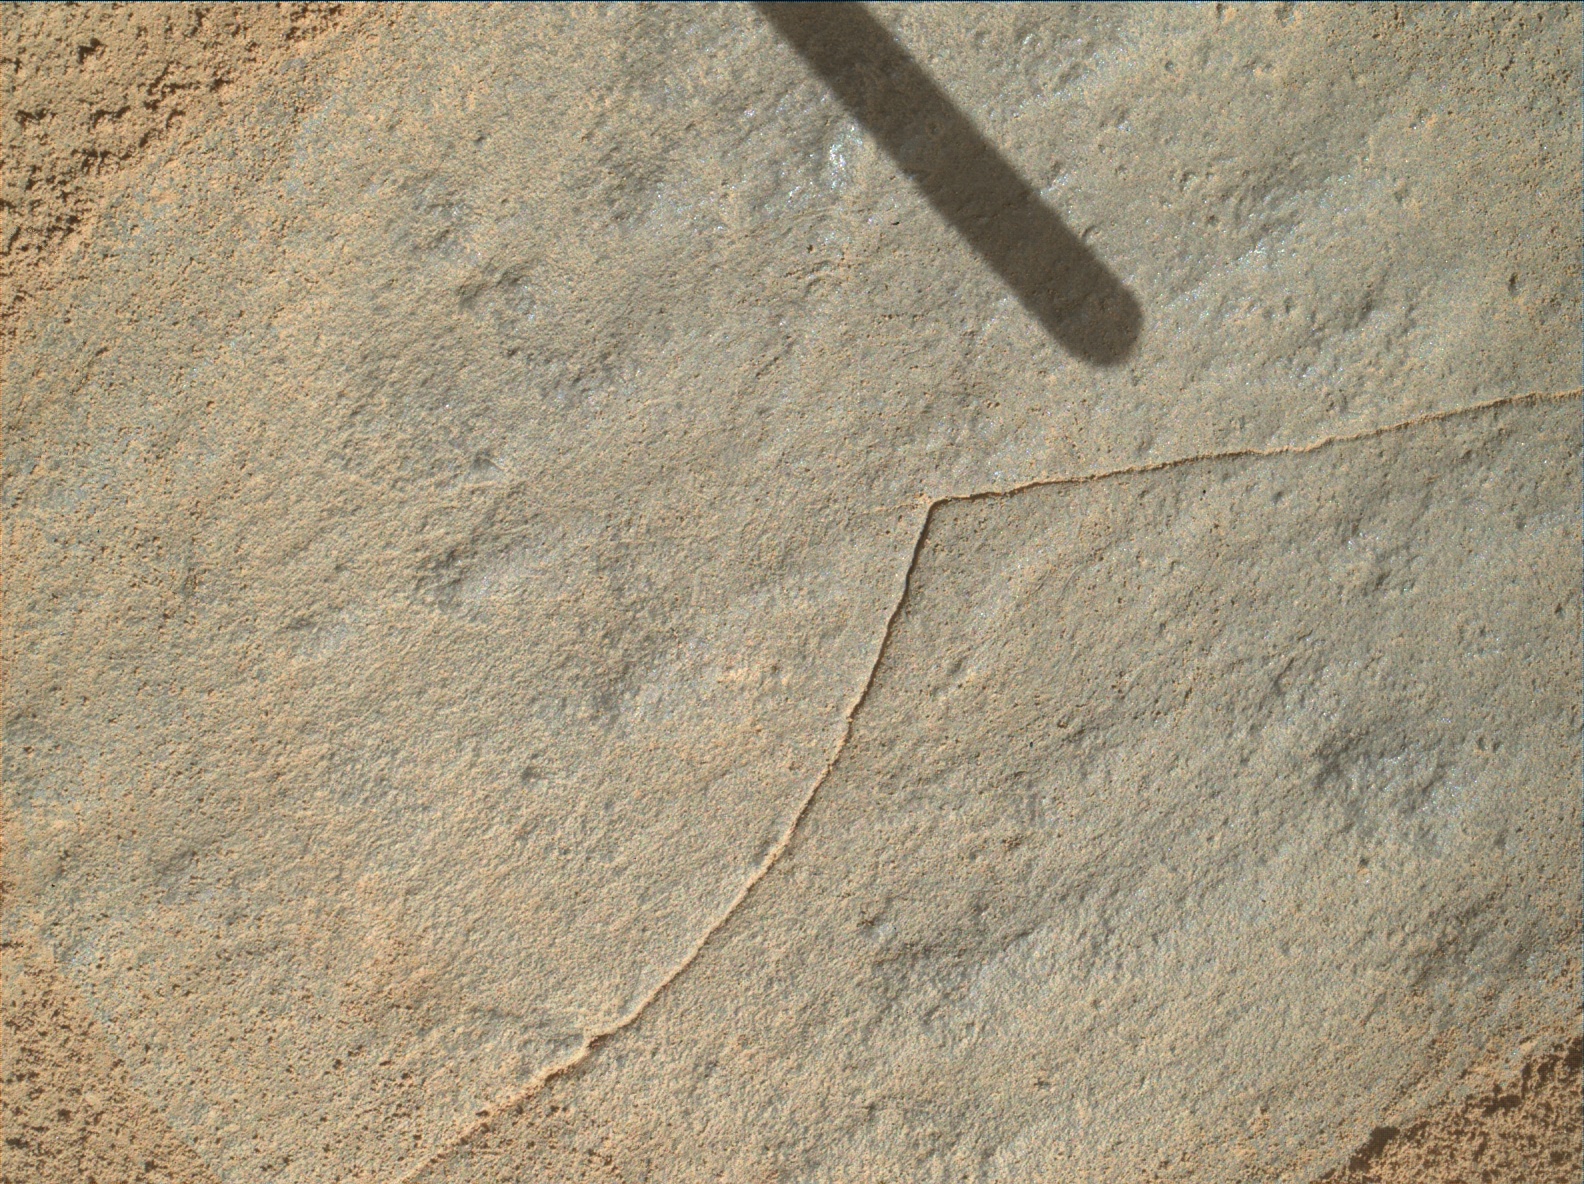 Nasa's Mars rover Curiosity acquired this image using its Mars Hand Lens Imager (MAHLI) on Sol 612